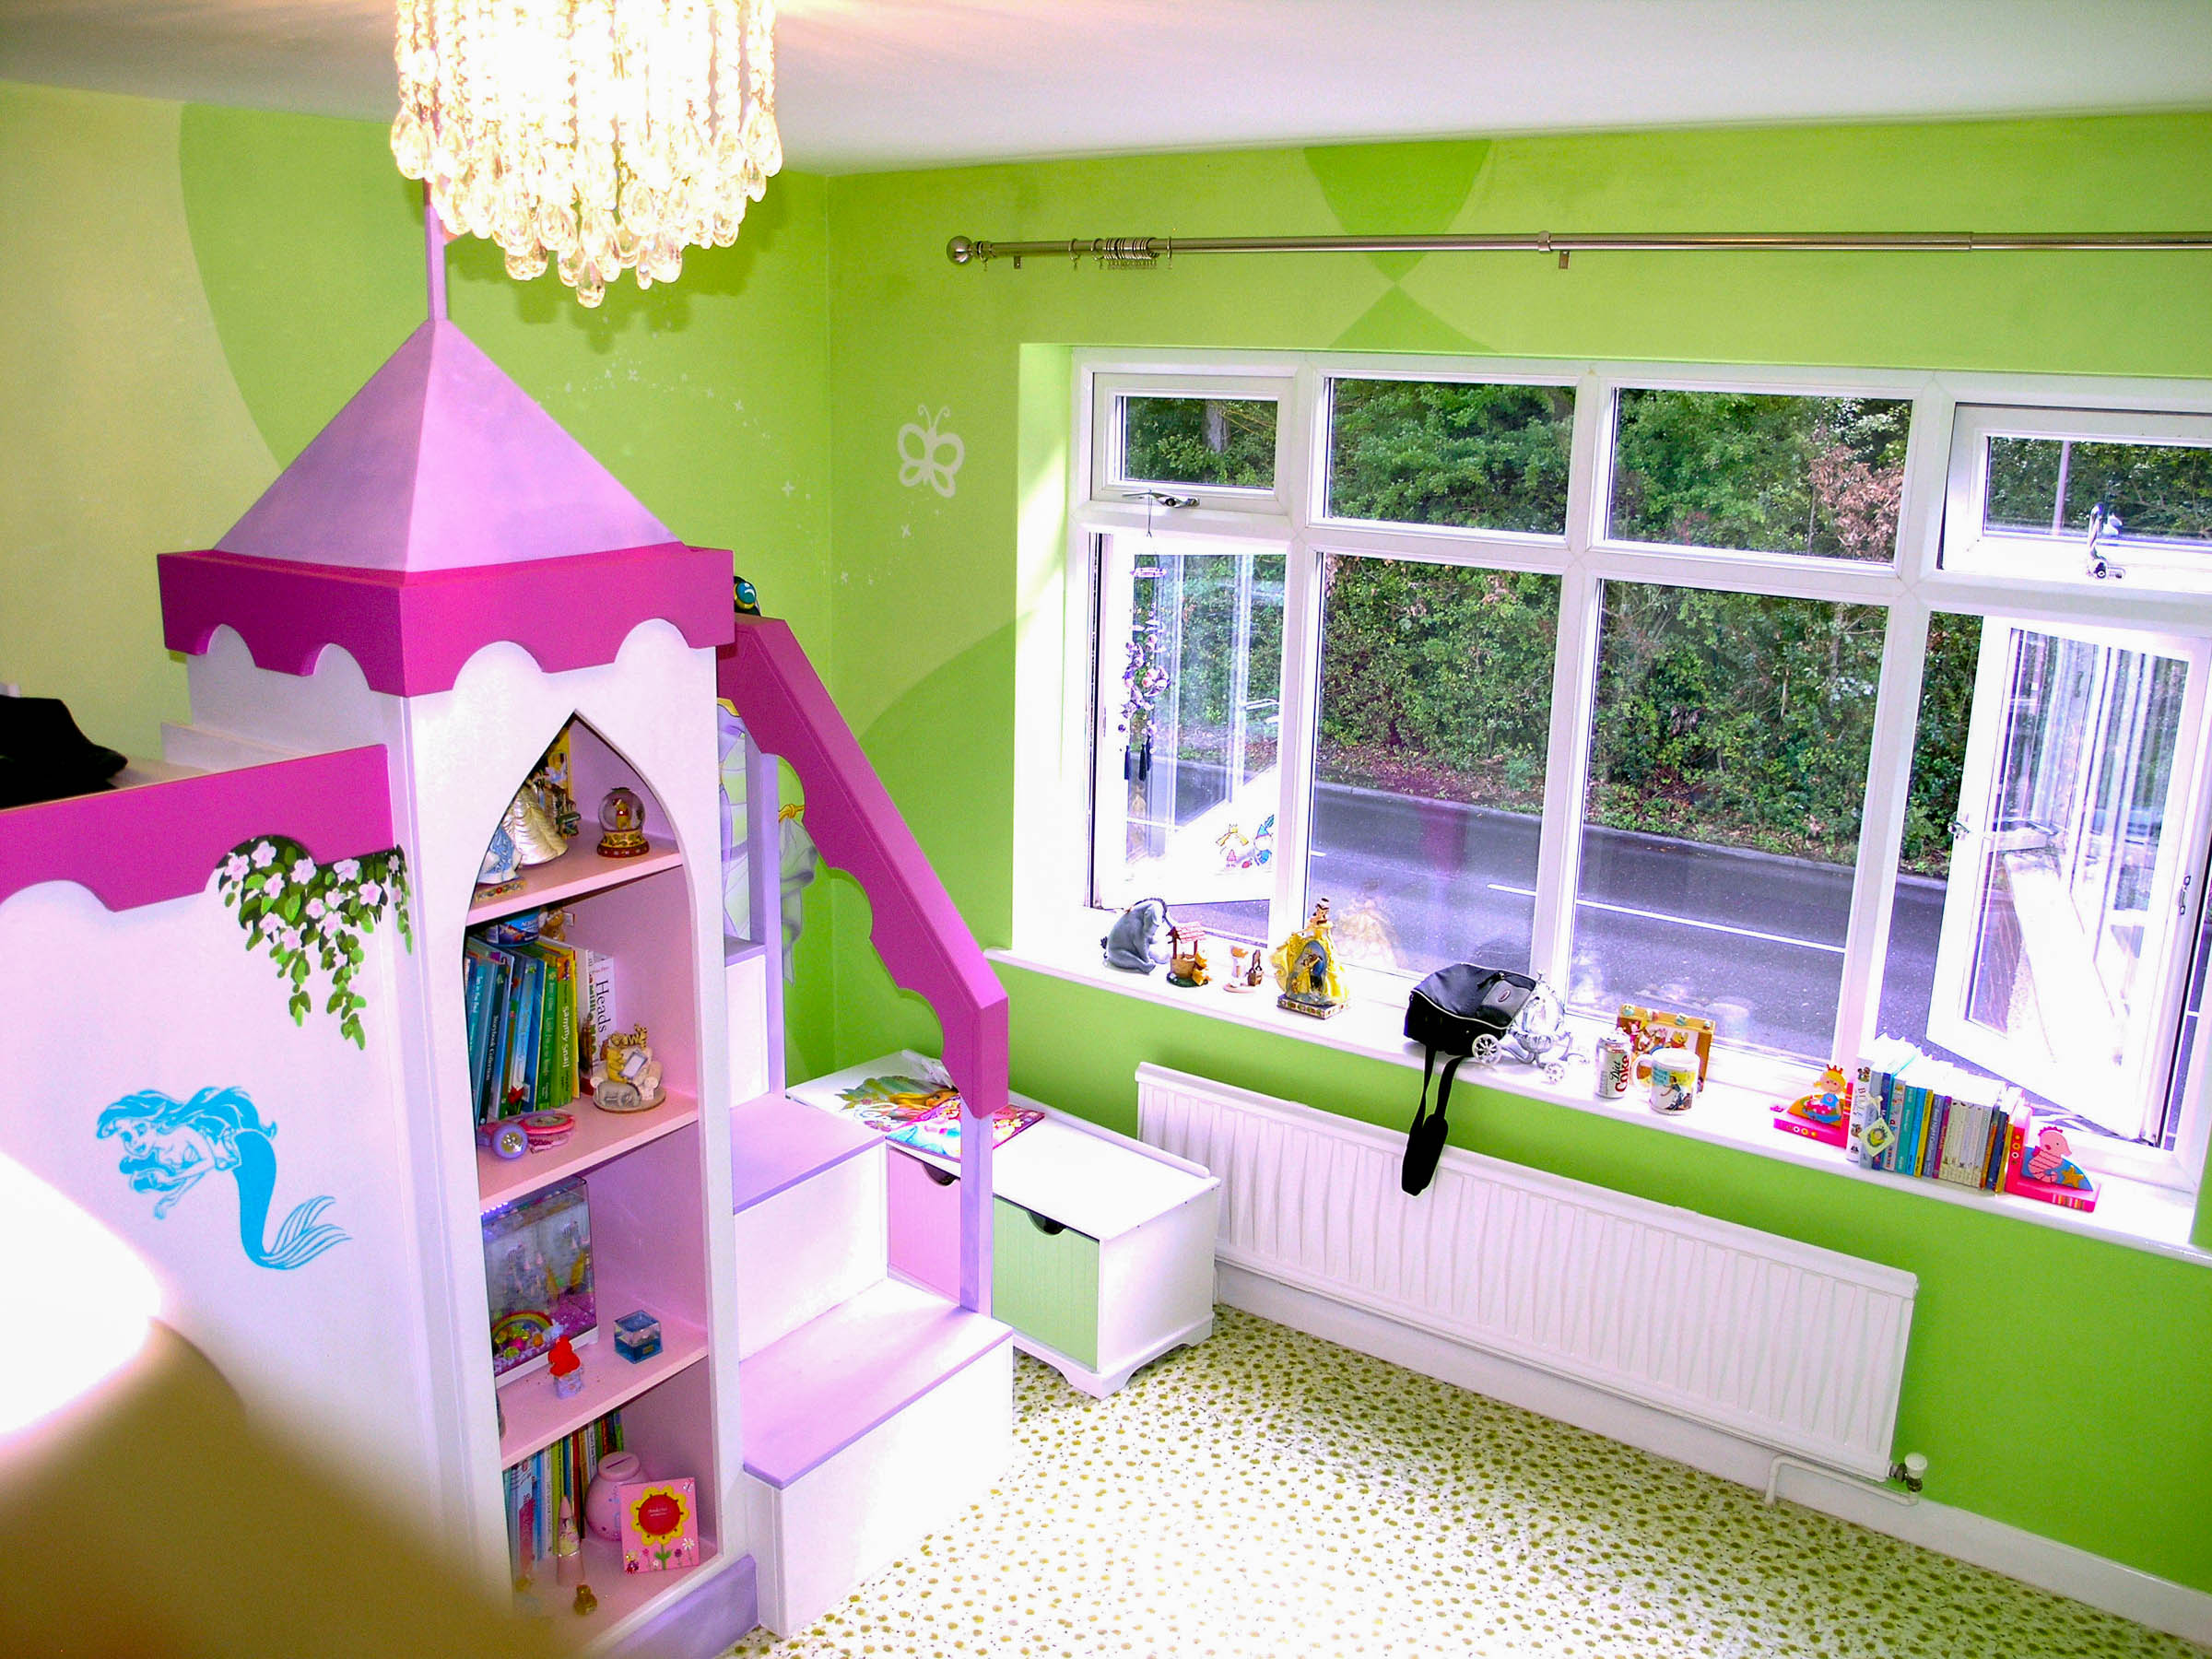 pink fitted castle in girl's green room